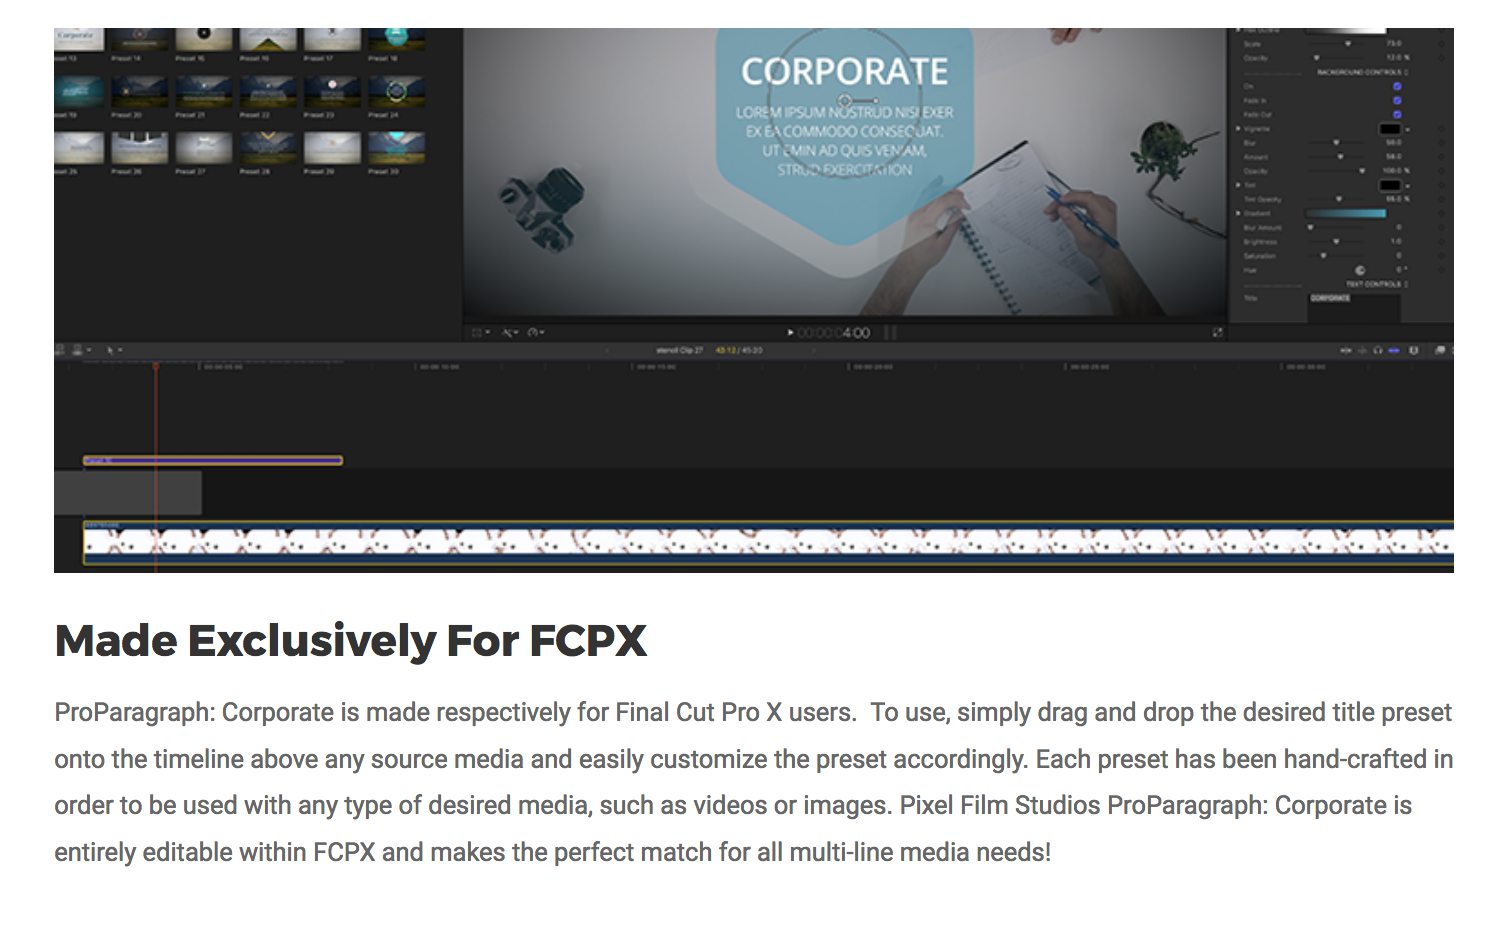 ProParagraph Corporate - Pixel Film Studios - FCPX Effects